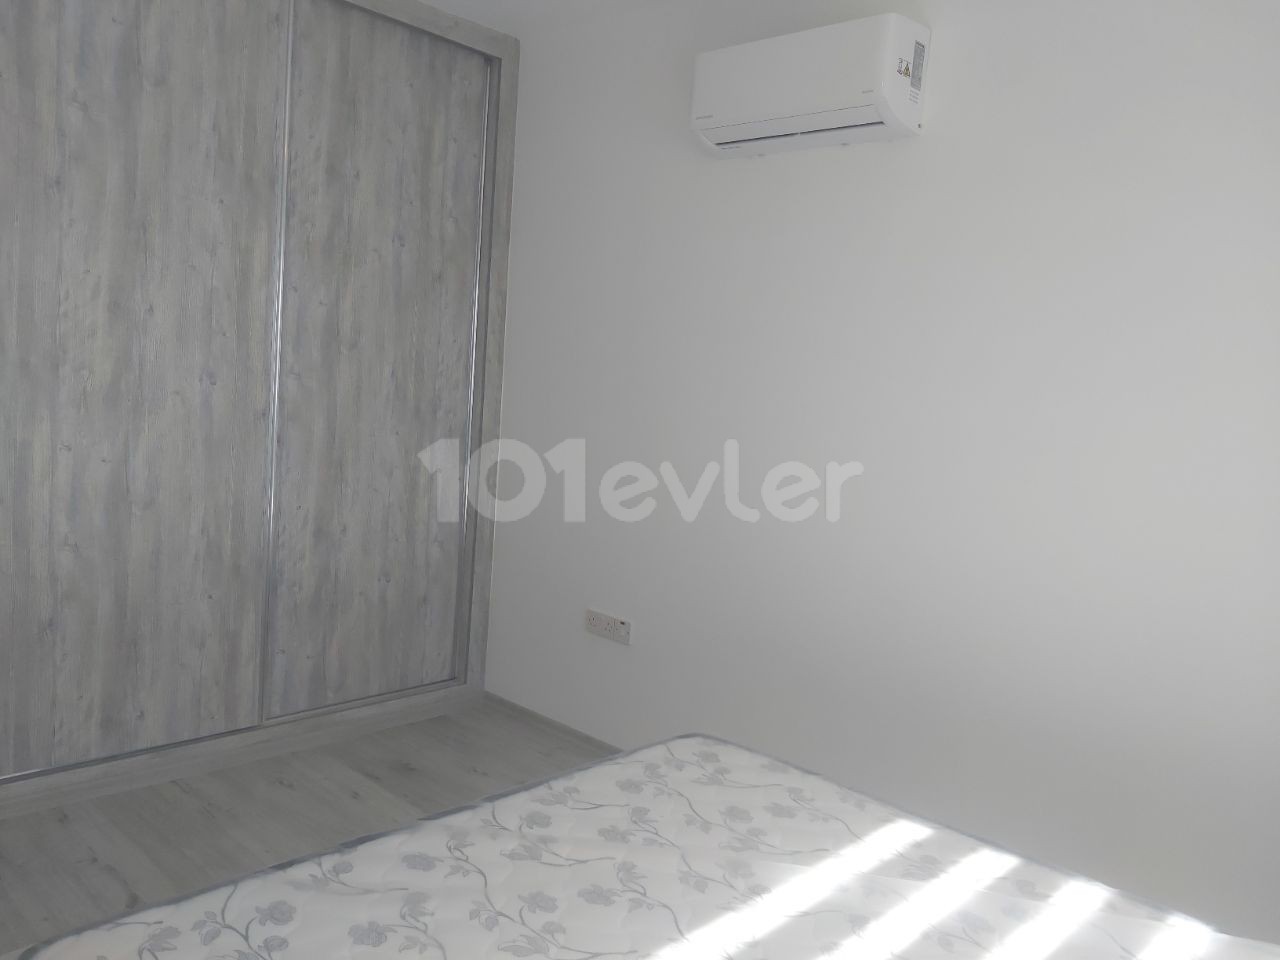 No more crowded apartments!! 2+1 fully furnished flat with ground floor garden for rent in Aşıklar Hill, the most decent area of Gönyeli